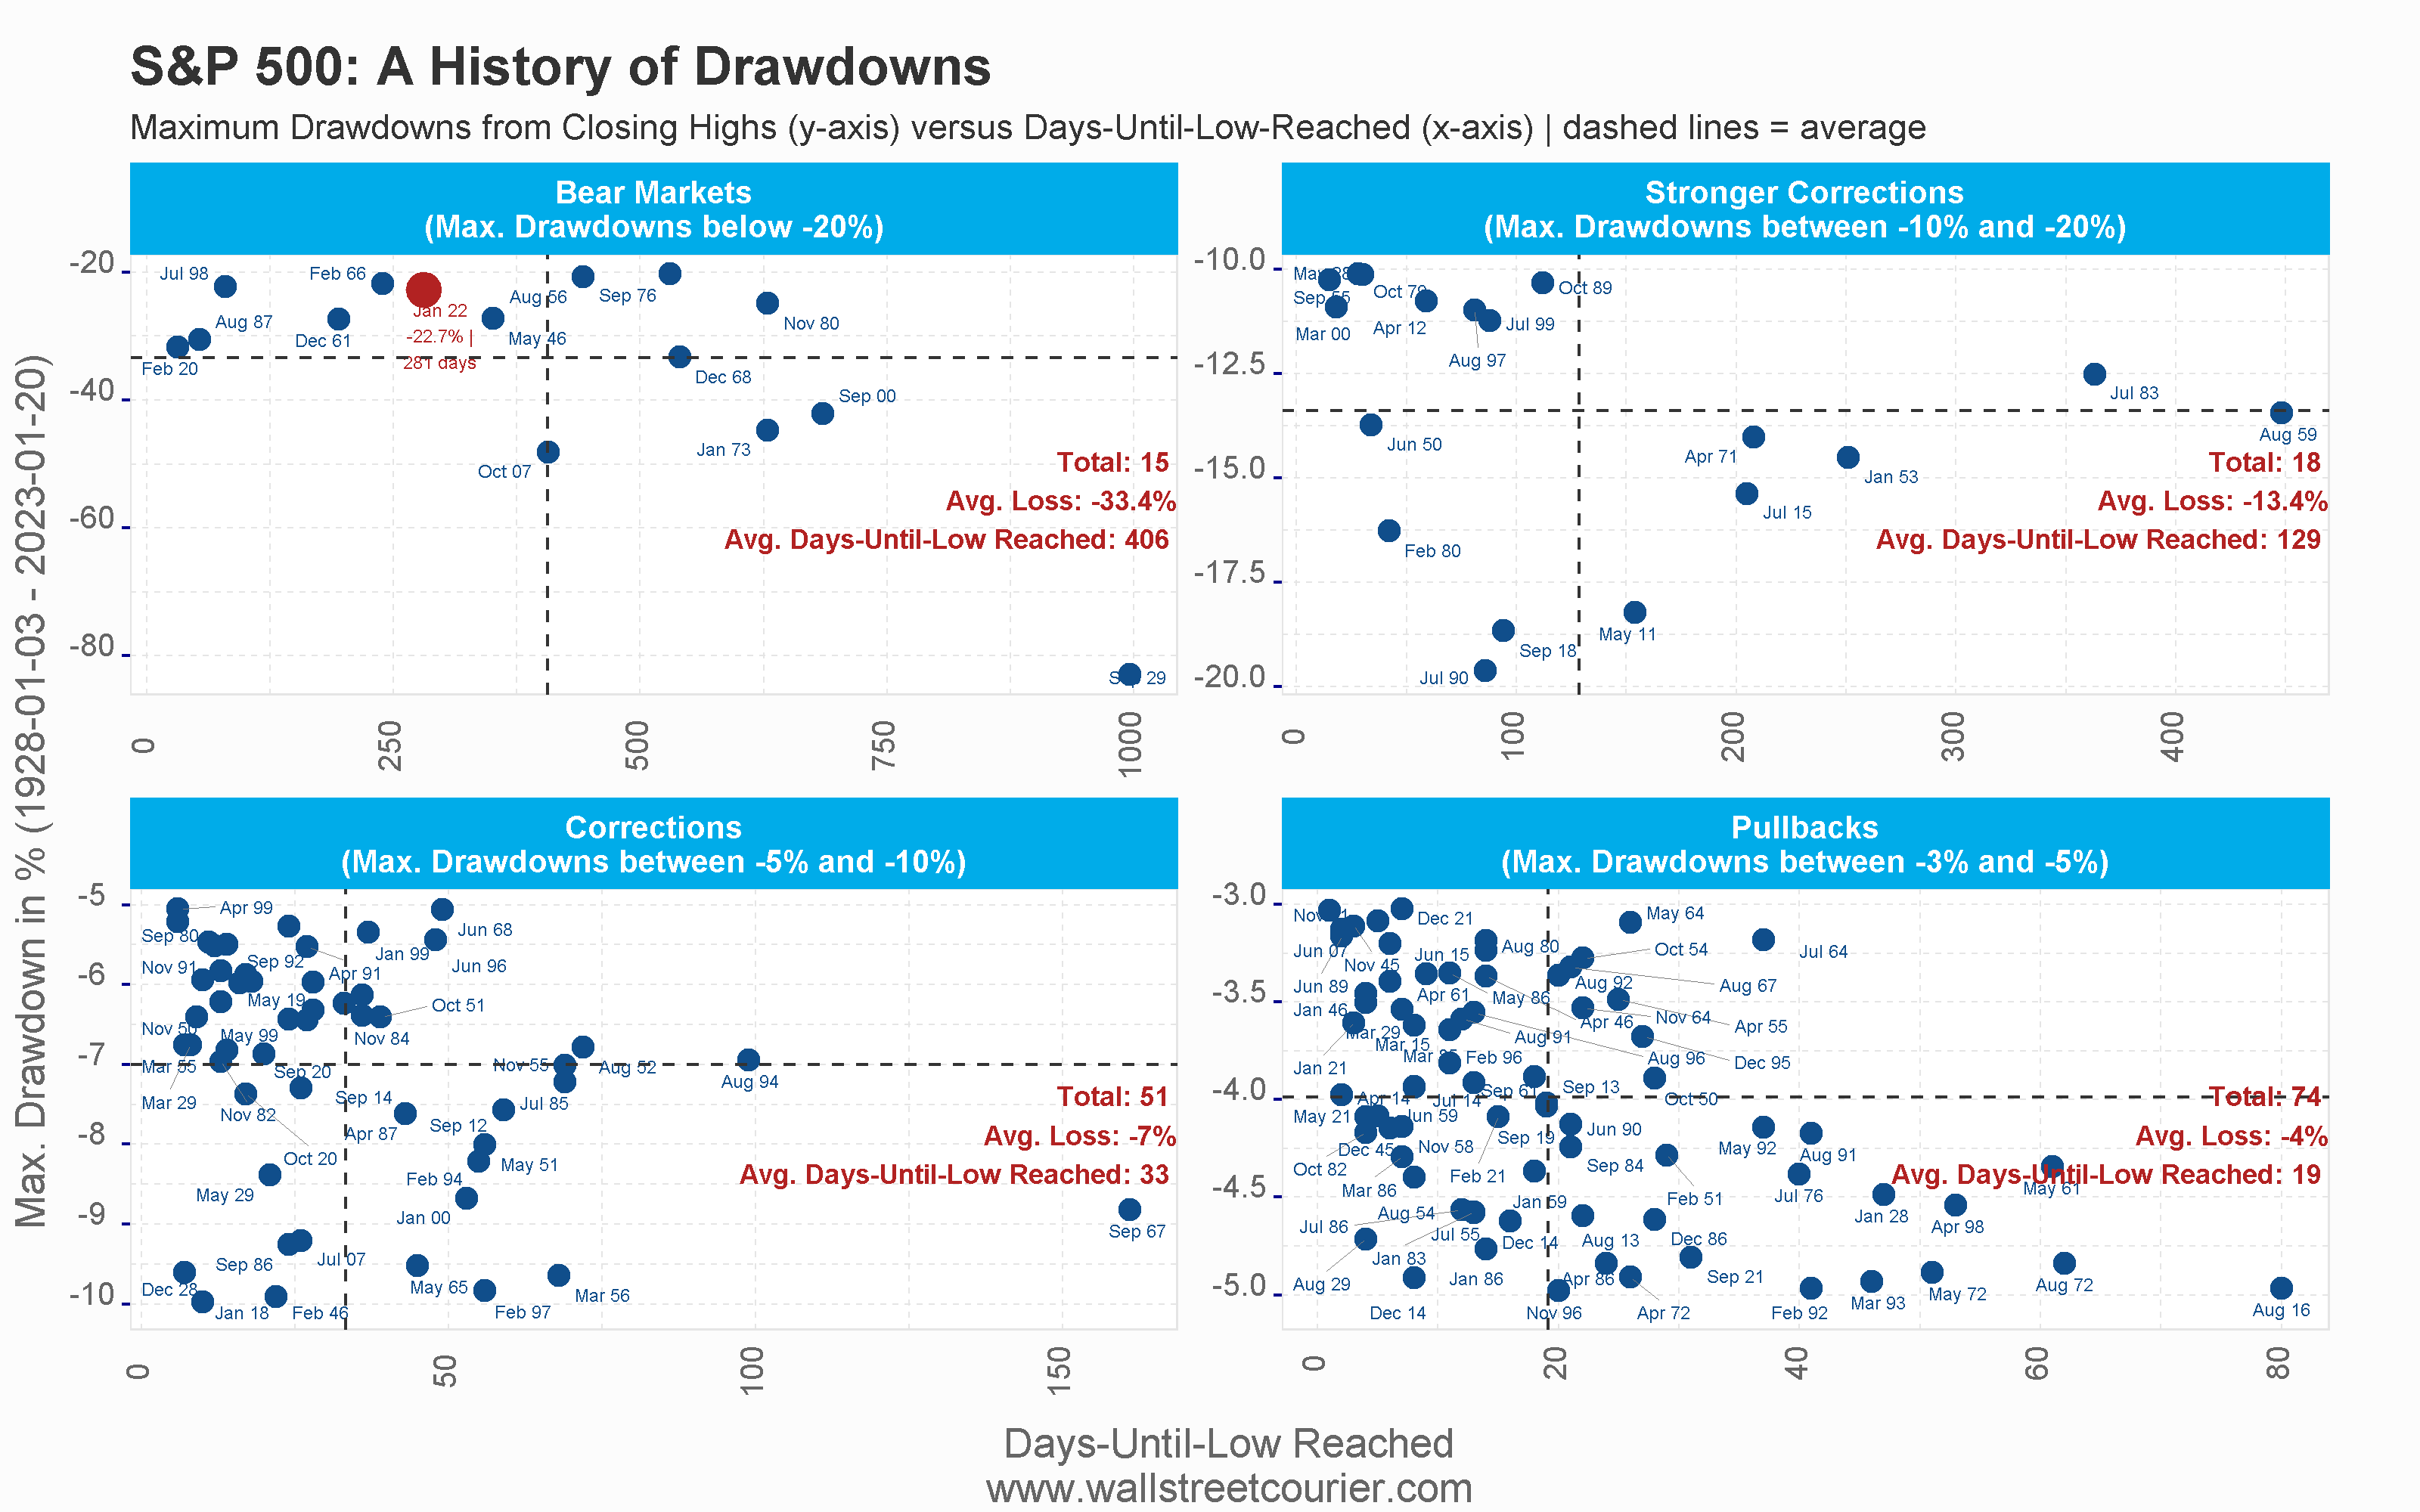 A chart showing the classification of stock market drawdowns as measured by the S&P 500 index, categorized into four levels of severity: Bear Markets (over 20% loss), Stronger Corrections (-10 to -20% loss), Corrections (-5 to -10% loss), and Pullbacks (-3 to -5% loss). The chart also includes average loss and average time to reach the final low for each category, represented by dotted lines, from 1928 to 2023